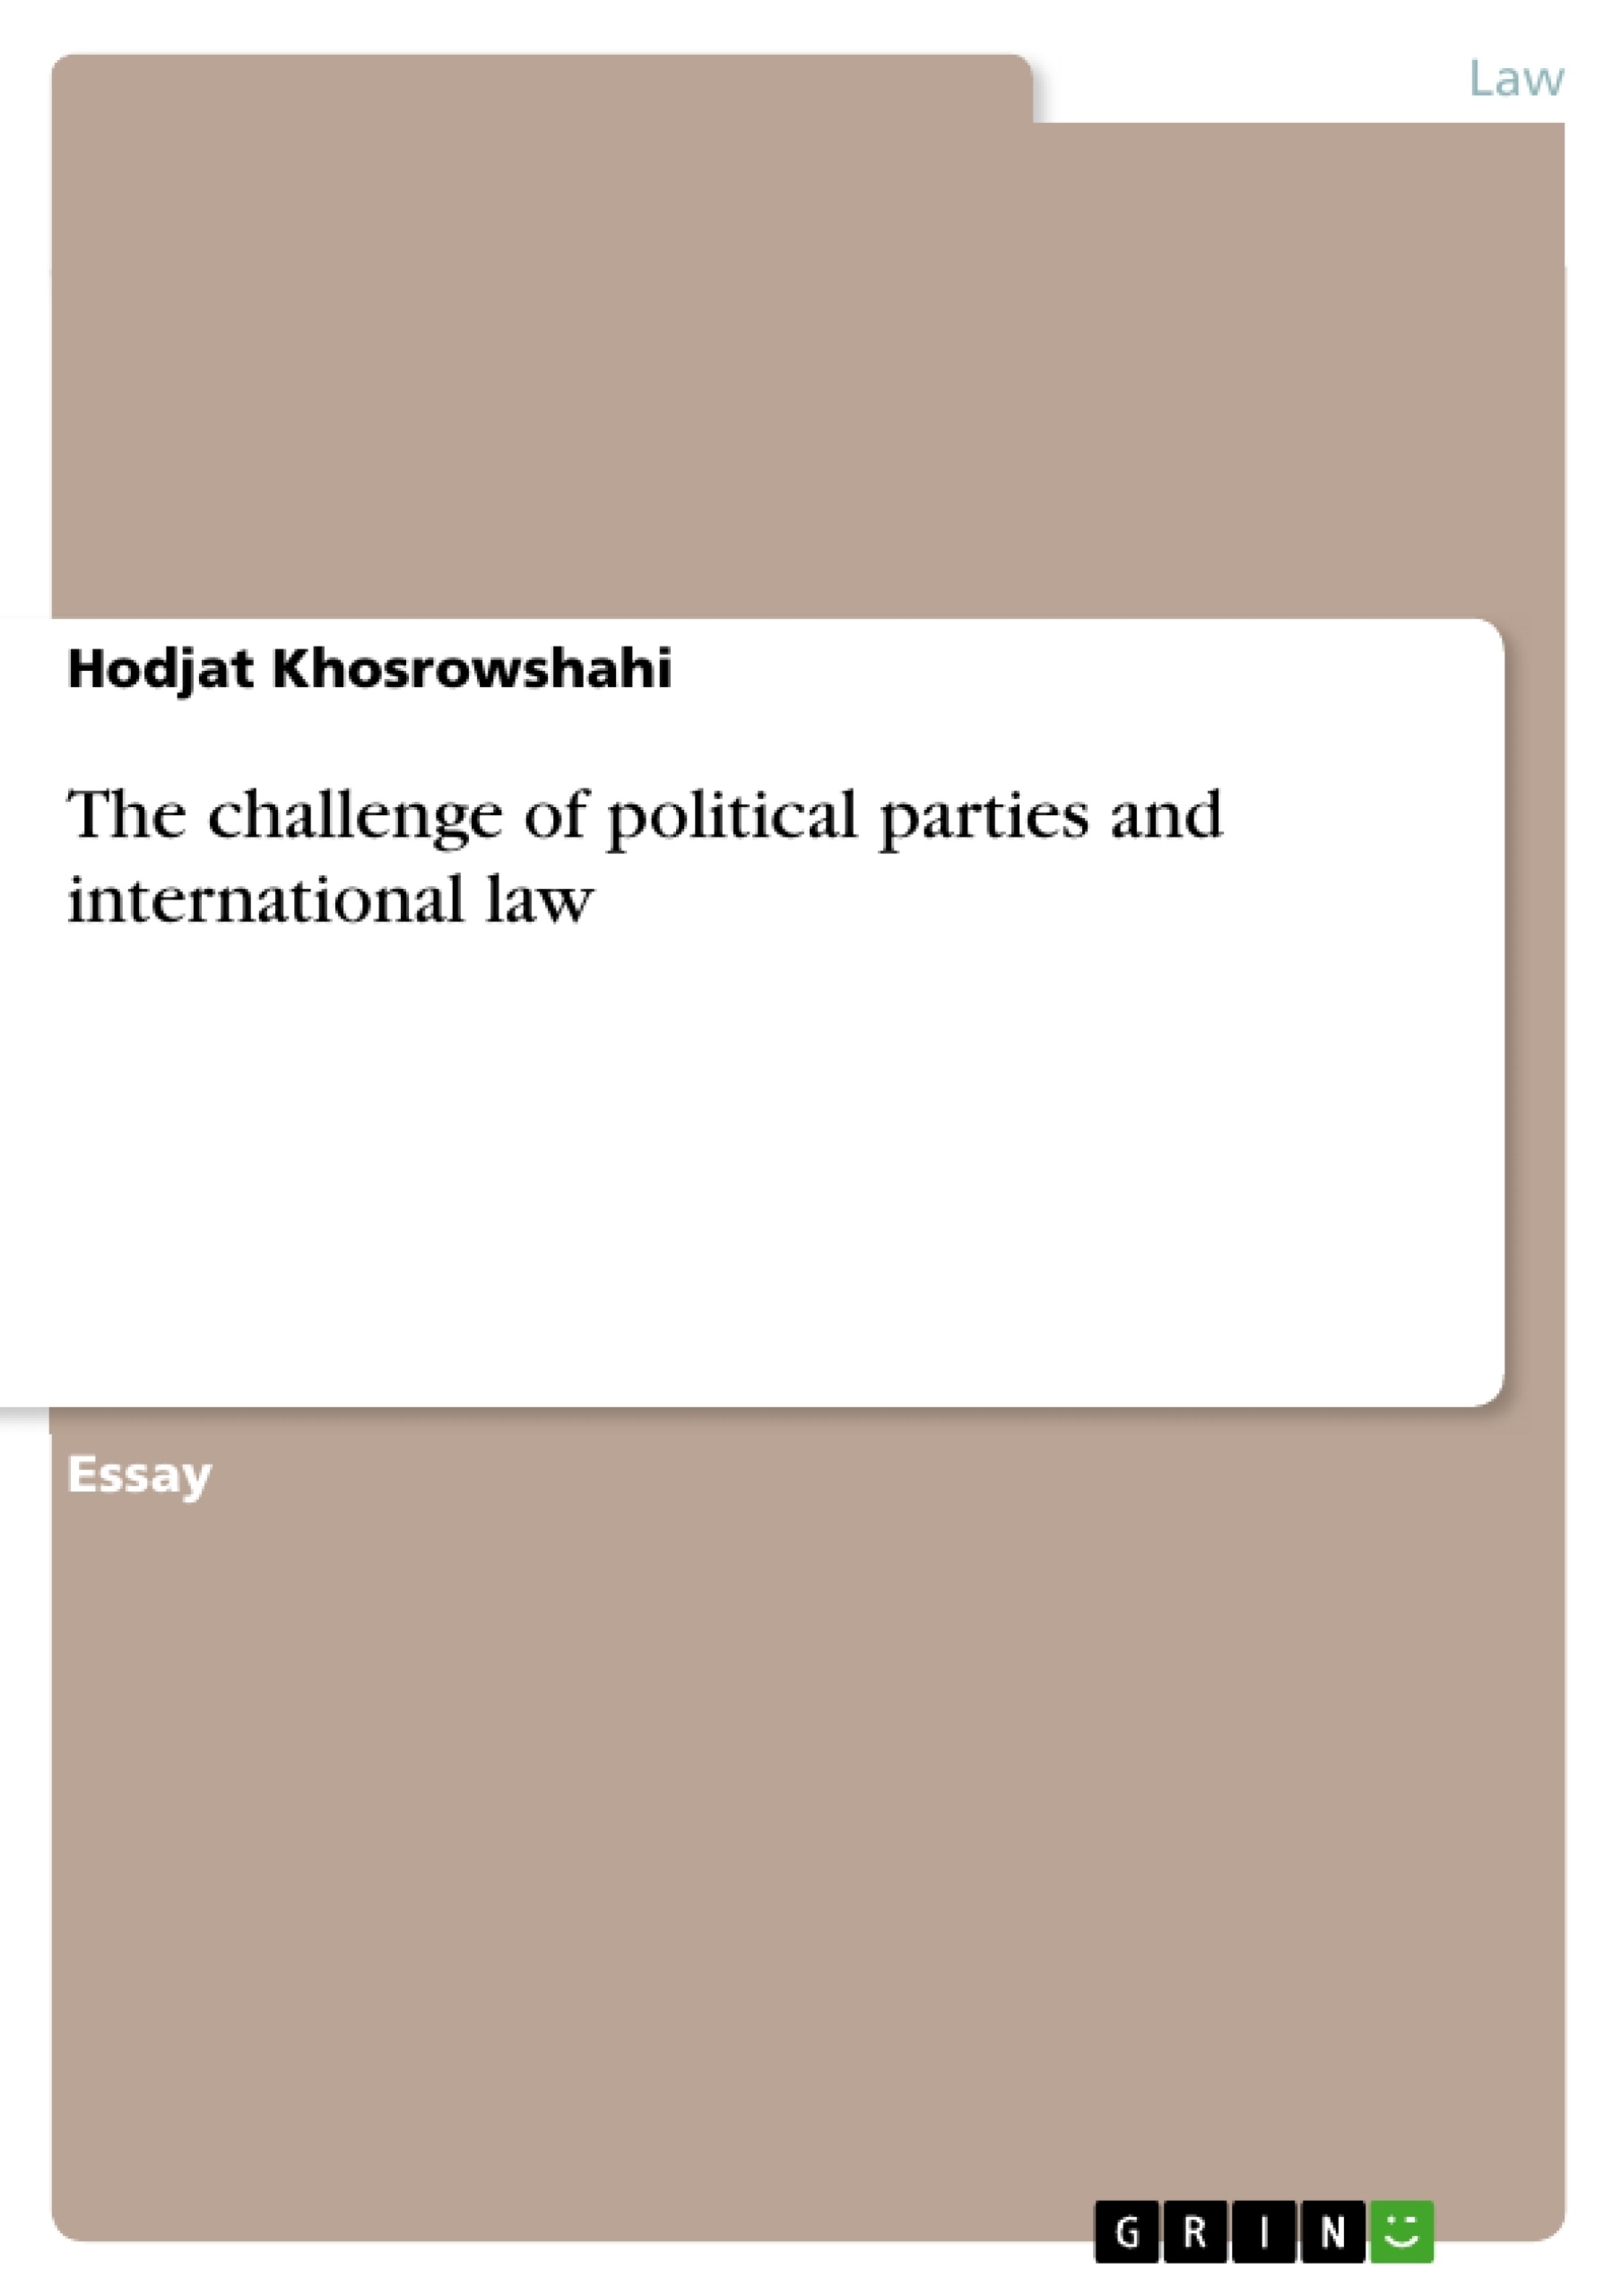 Title: The challenge of political parties and international law